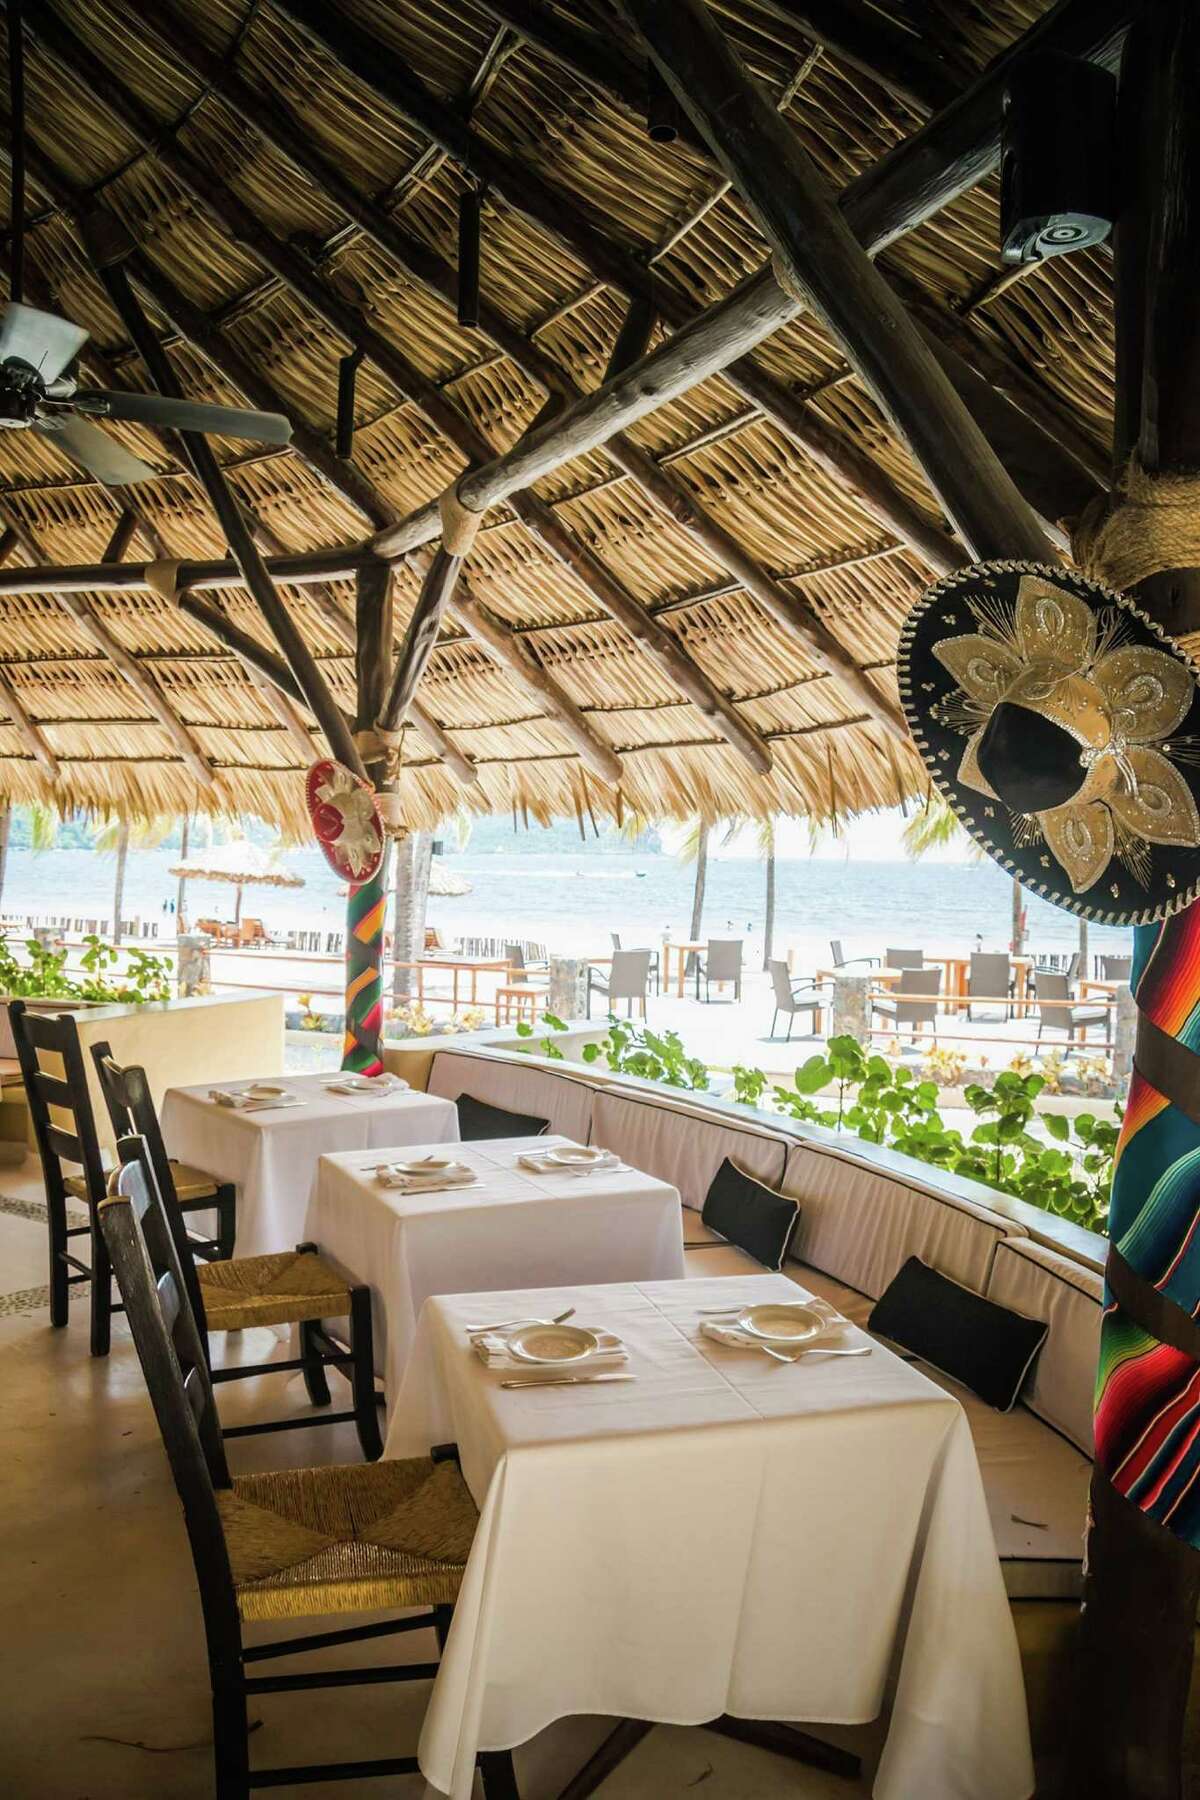 La Villa restaurant overlooks the beach at Viceroy resort in Zihuatanejo, where chef Paco Isordia has been serving local Mexican food and pozole for more than 25 years (long before Viceroy bought the property and changed its name).